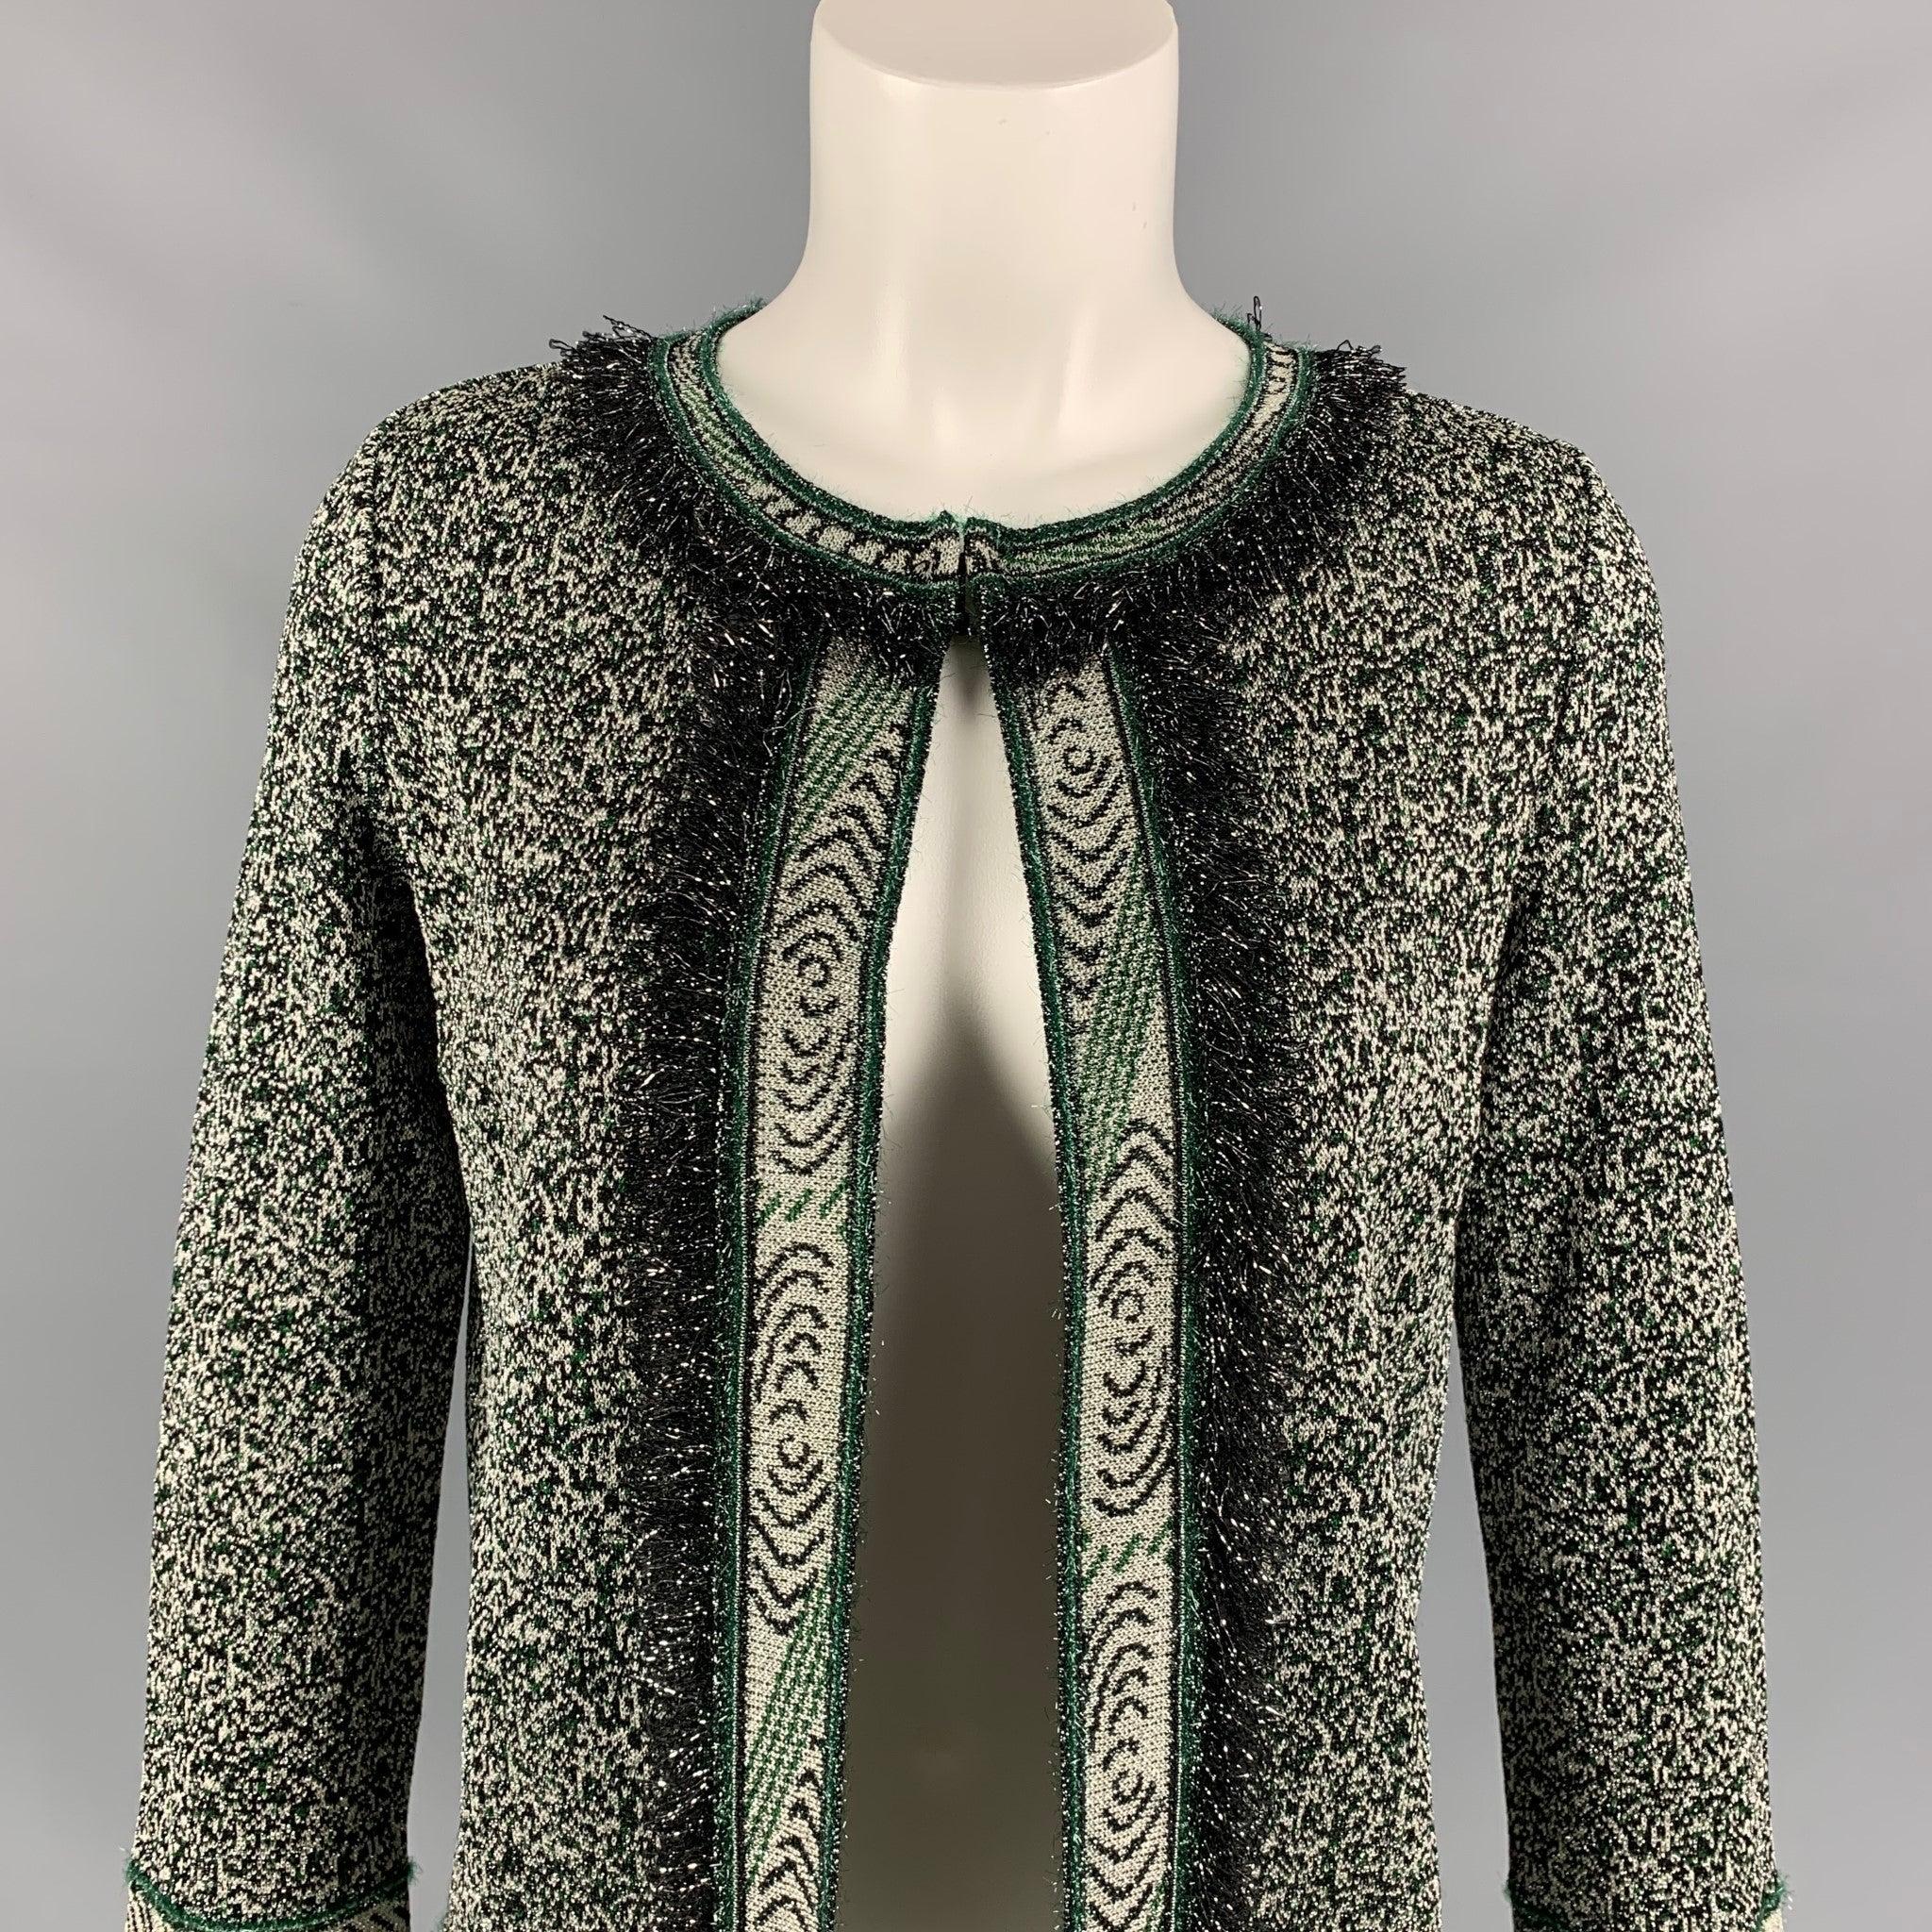 M MISSONI cardigan comes in a green & silver knitted acetate blend featuring a fringe trim, hook & loop detail, and a open front. Made in Italy.
Very Good
Pre-Owned Condition. 

Marked:   I 38 / D 32 / A 32 / EFB 34 / GB 6 / USA 2 

Measurements: 
